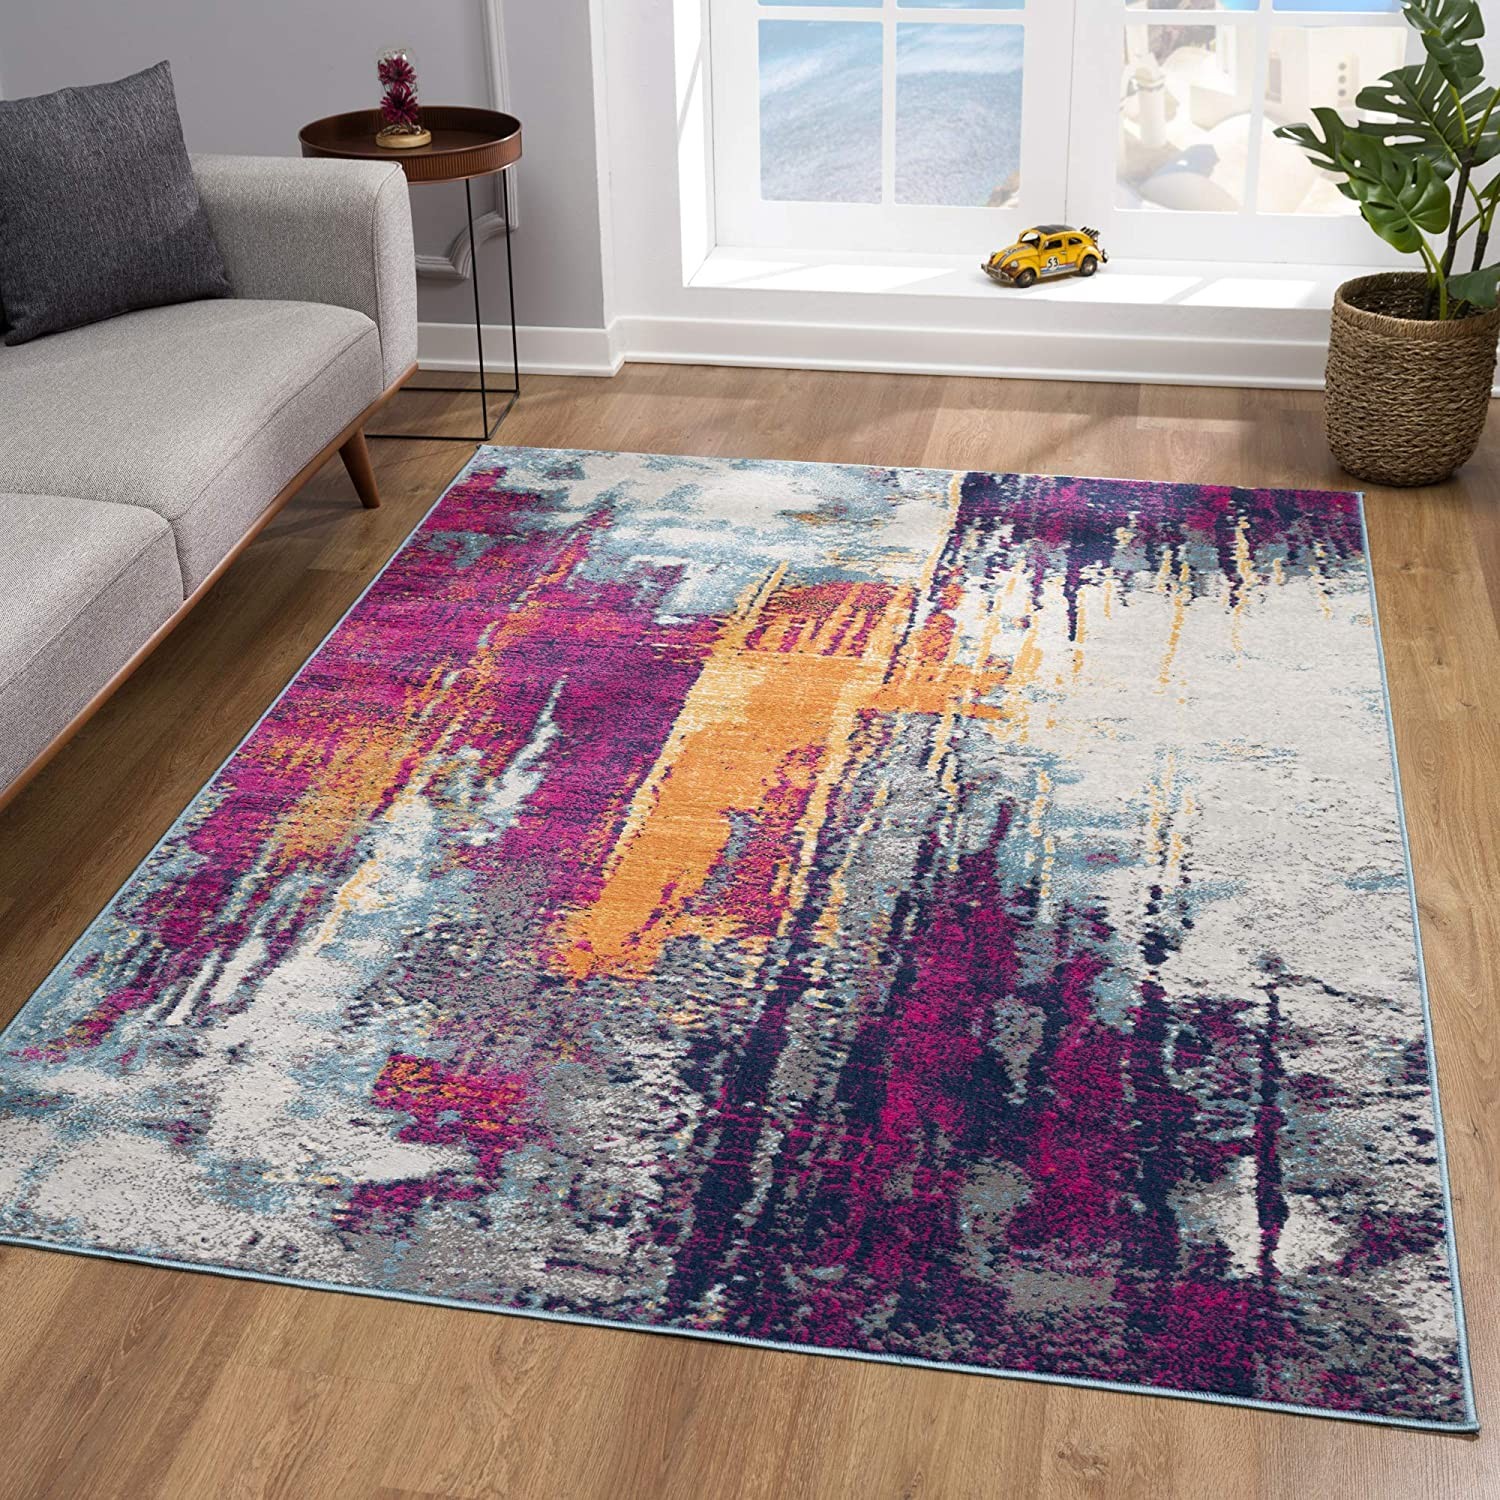 2 x 4 Gray and Magenta Abstract Area Rug